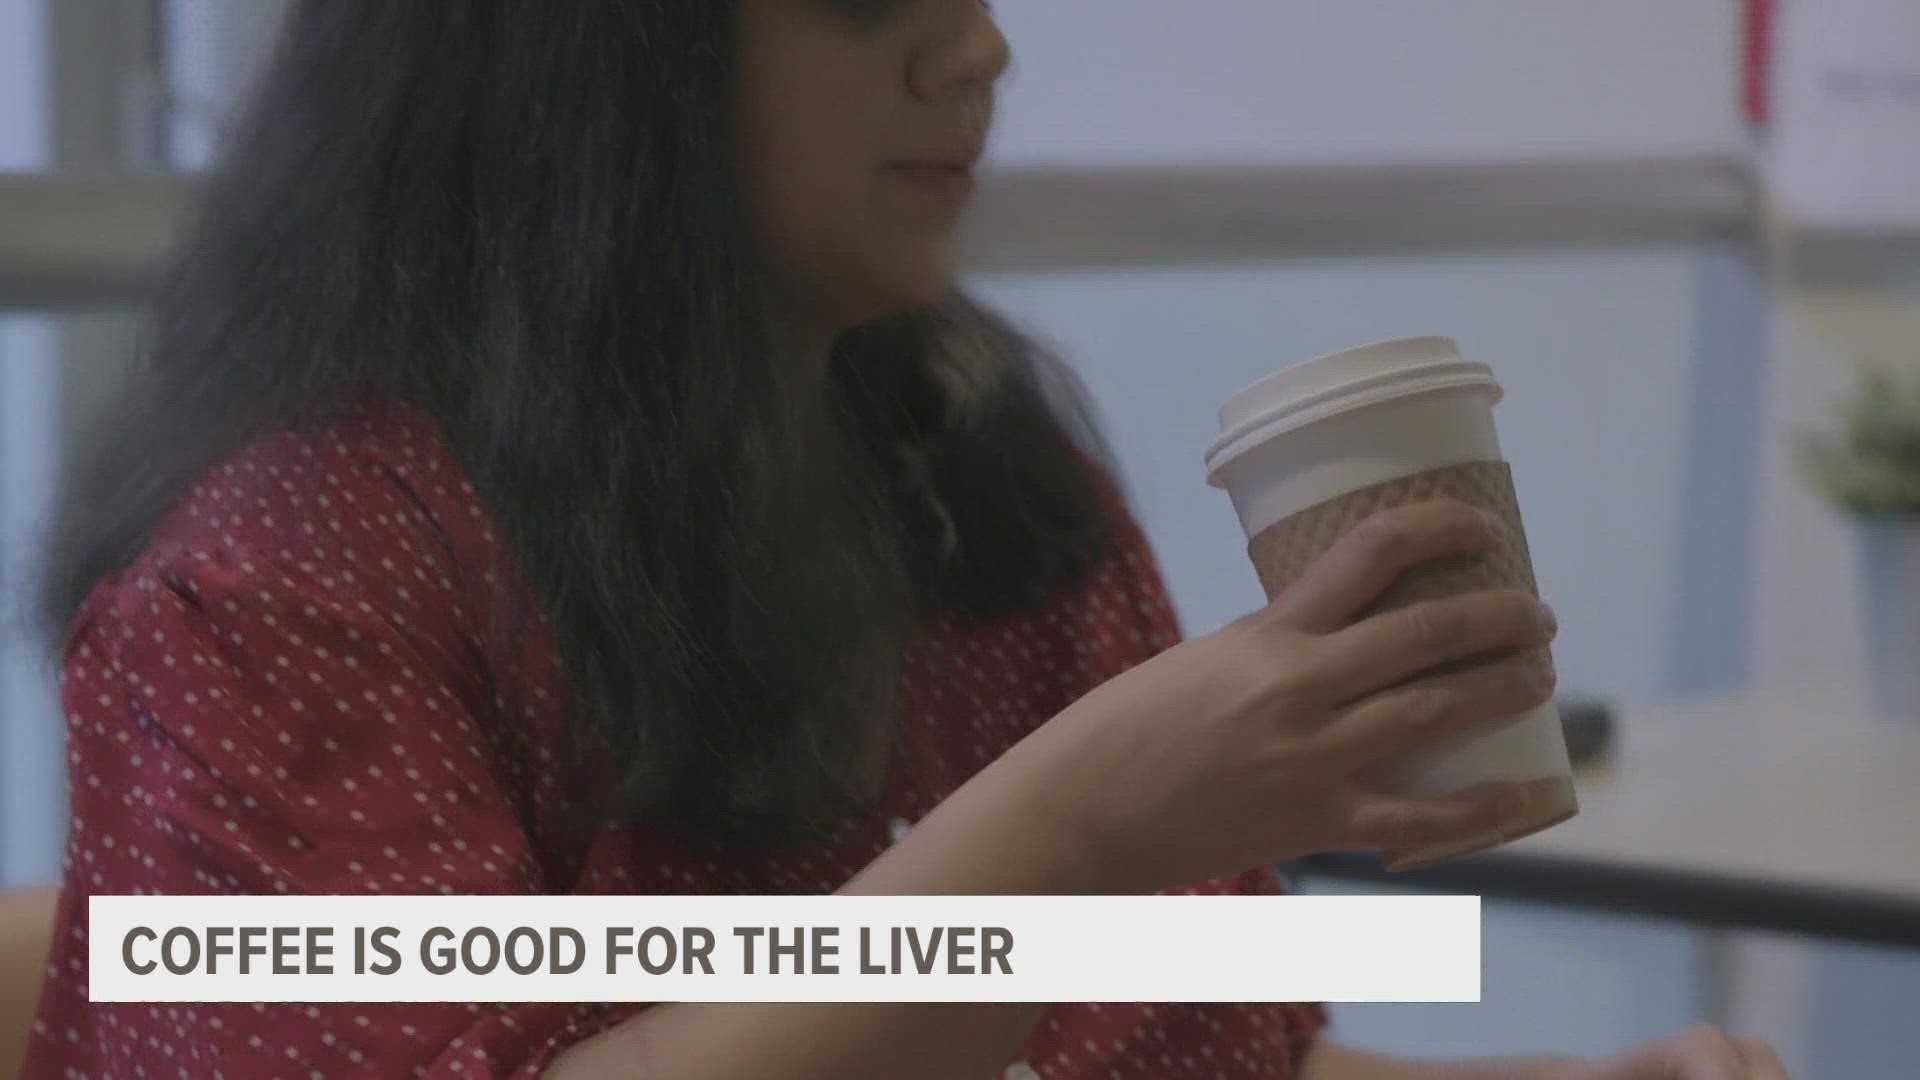 It turns out that coffee is actually good for your liver.